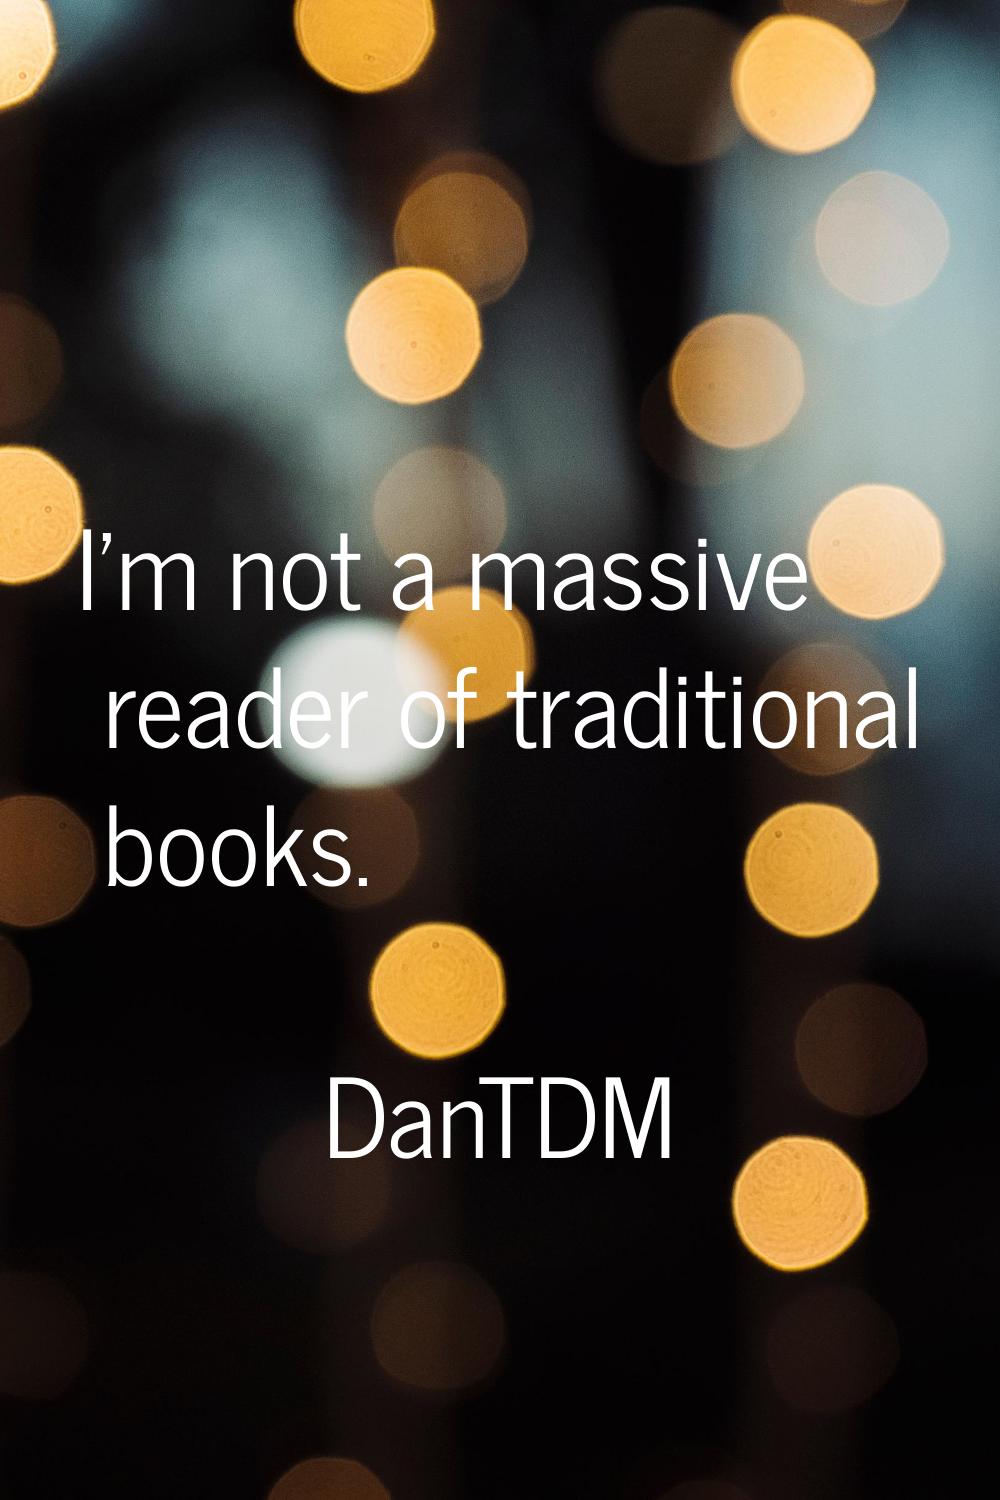 I'm not a massive reader of traditional books.